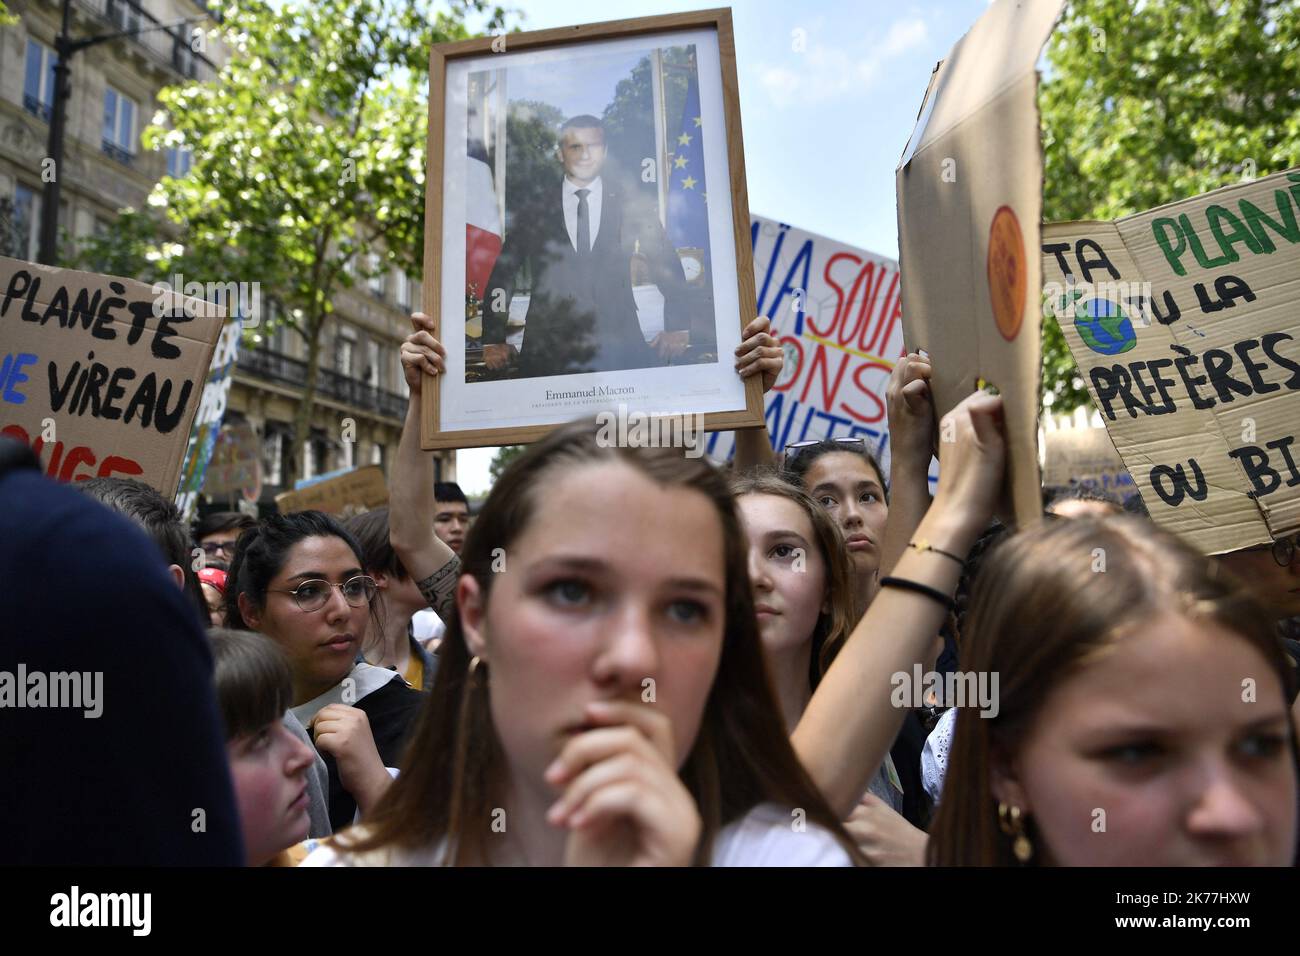 Demonstration of young people and students and call for a climate strike, to alert politicians on the climate emergency. Stock Photo